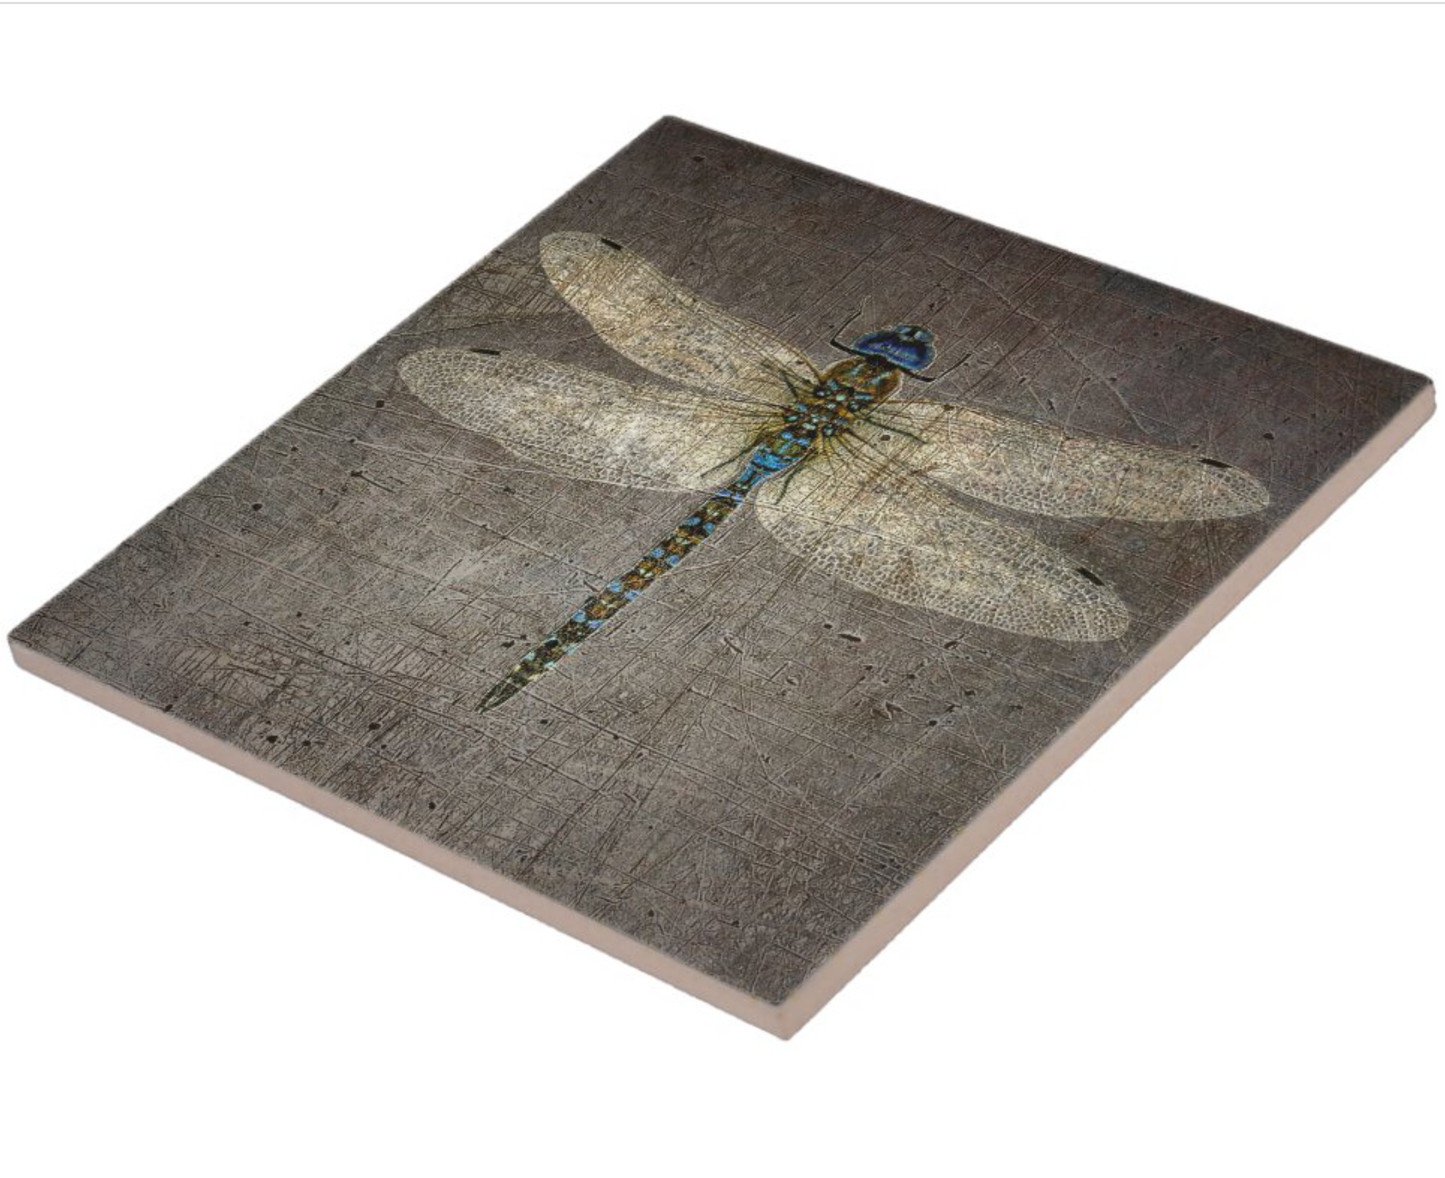 Collectible Ceramic Tile, Silver Dragonfly Print on a 8 by 8 Ceramic Tile 